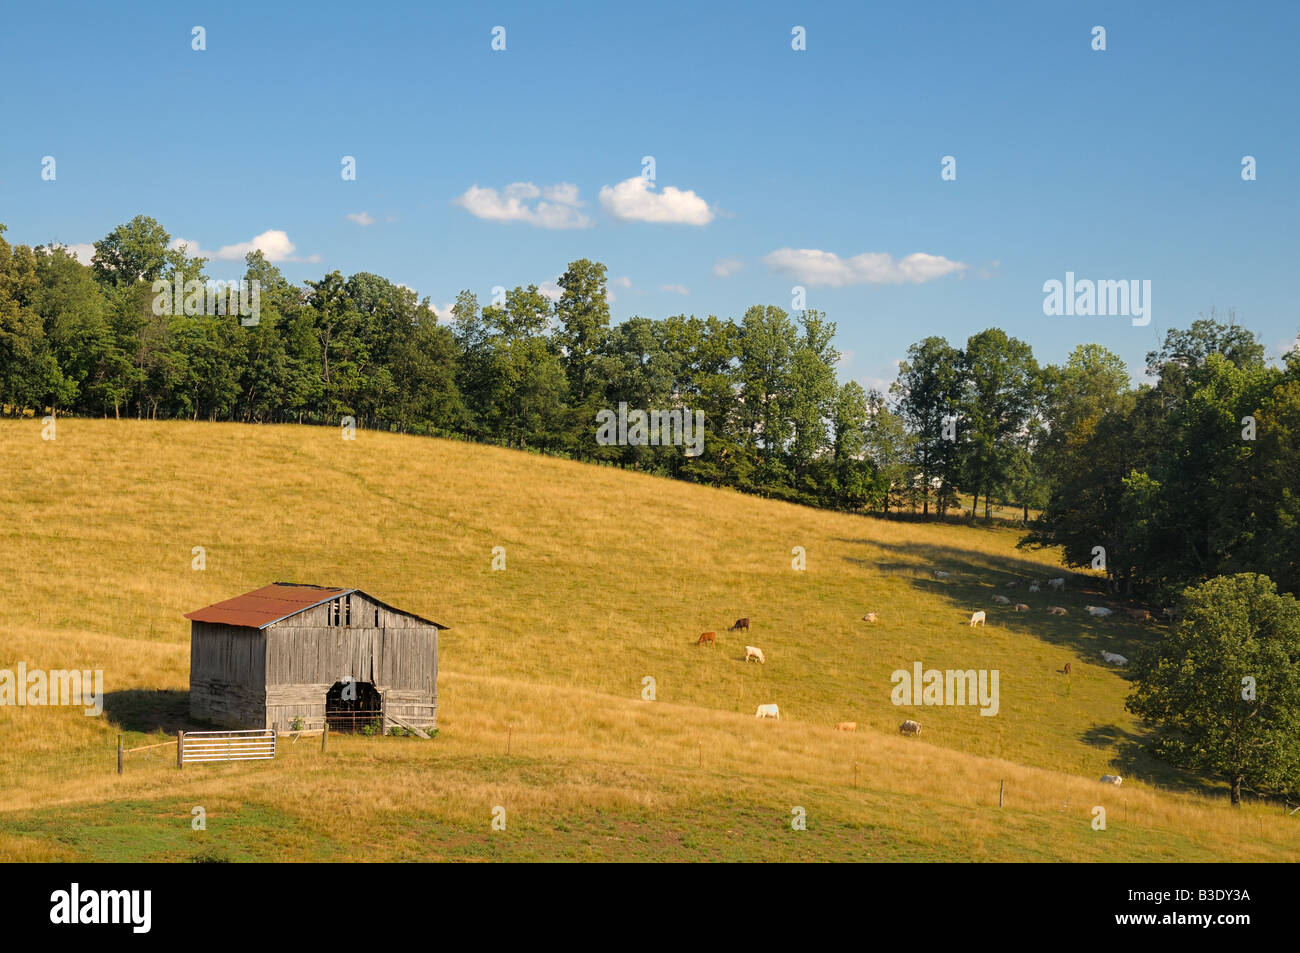 A pastoral American cattle farm scenic in Grainger County, Tennessee, USA in July. Stock Photo